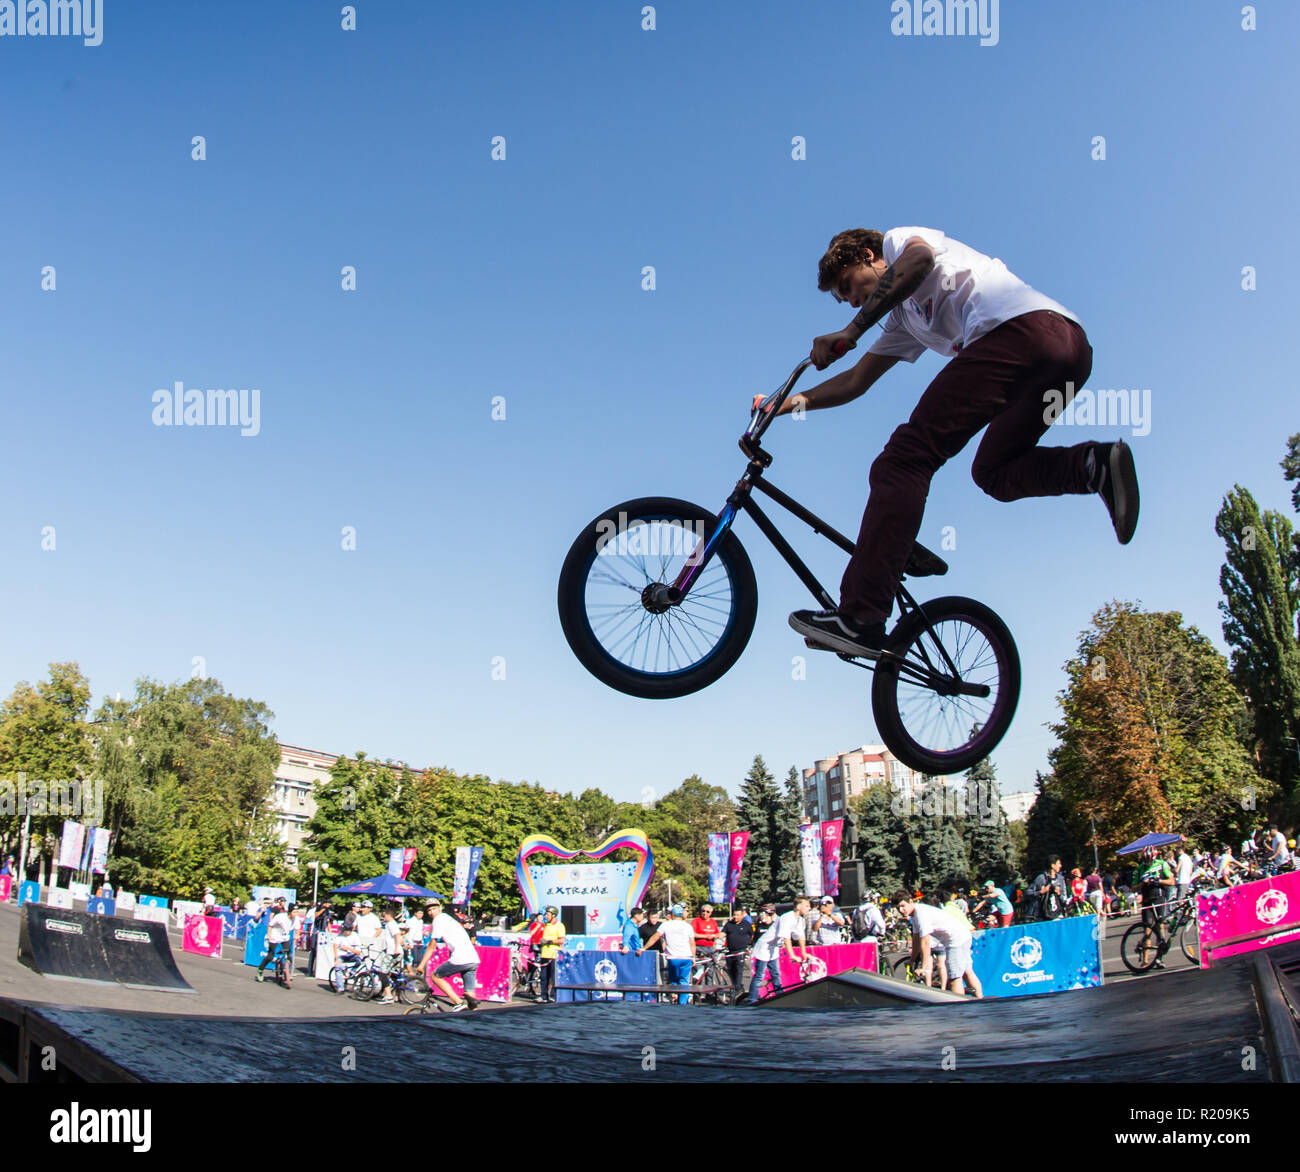 KAZAKHSTAN ALMATY - AUGUST 28, 2016: Urban extreme competition, where the city athletes compete in the disciplines: skateboard, roller skates, BMX. Bmx stunt performed at the top of a mini ramp on a skatepark. Stock Photo